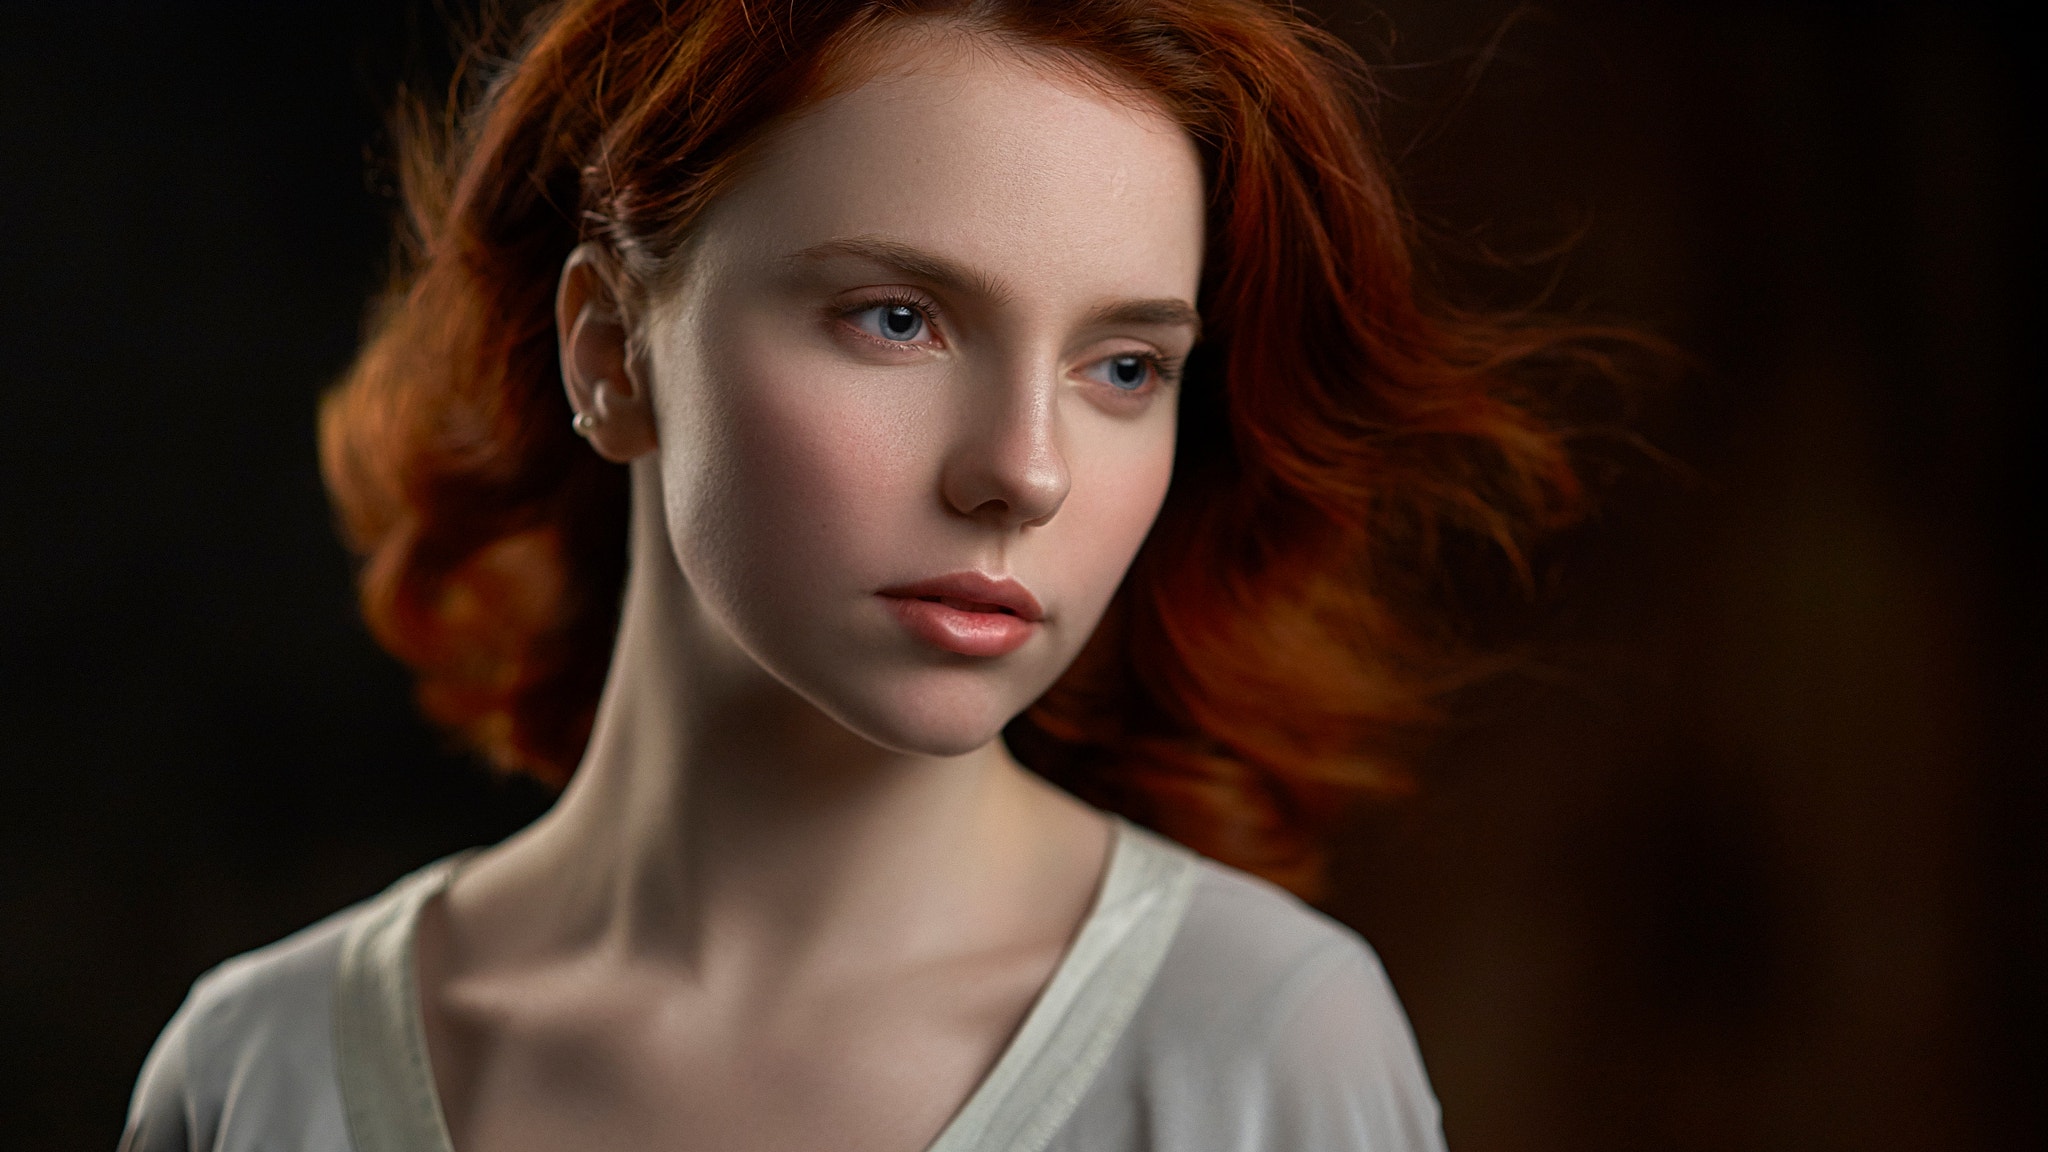 People 2048x1152 redhead Pavel Cherepko women portrait simple background blue eyes looking at viewer face photography model